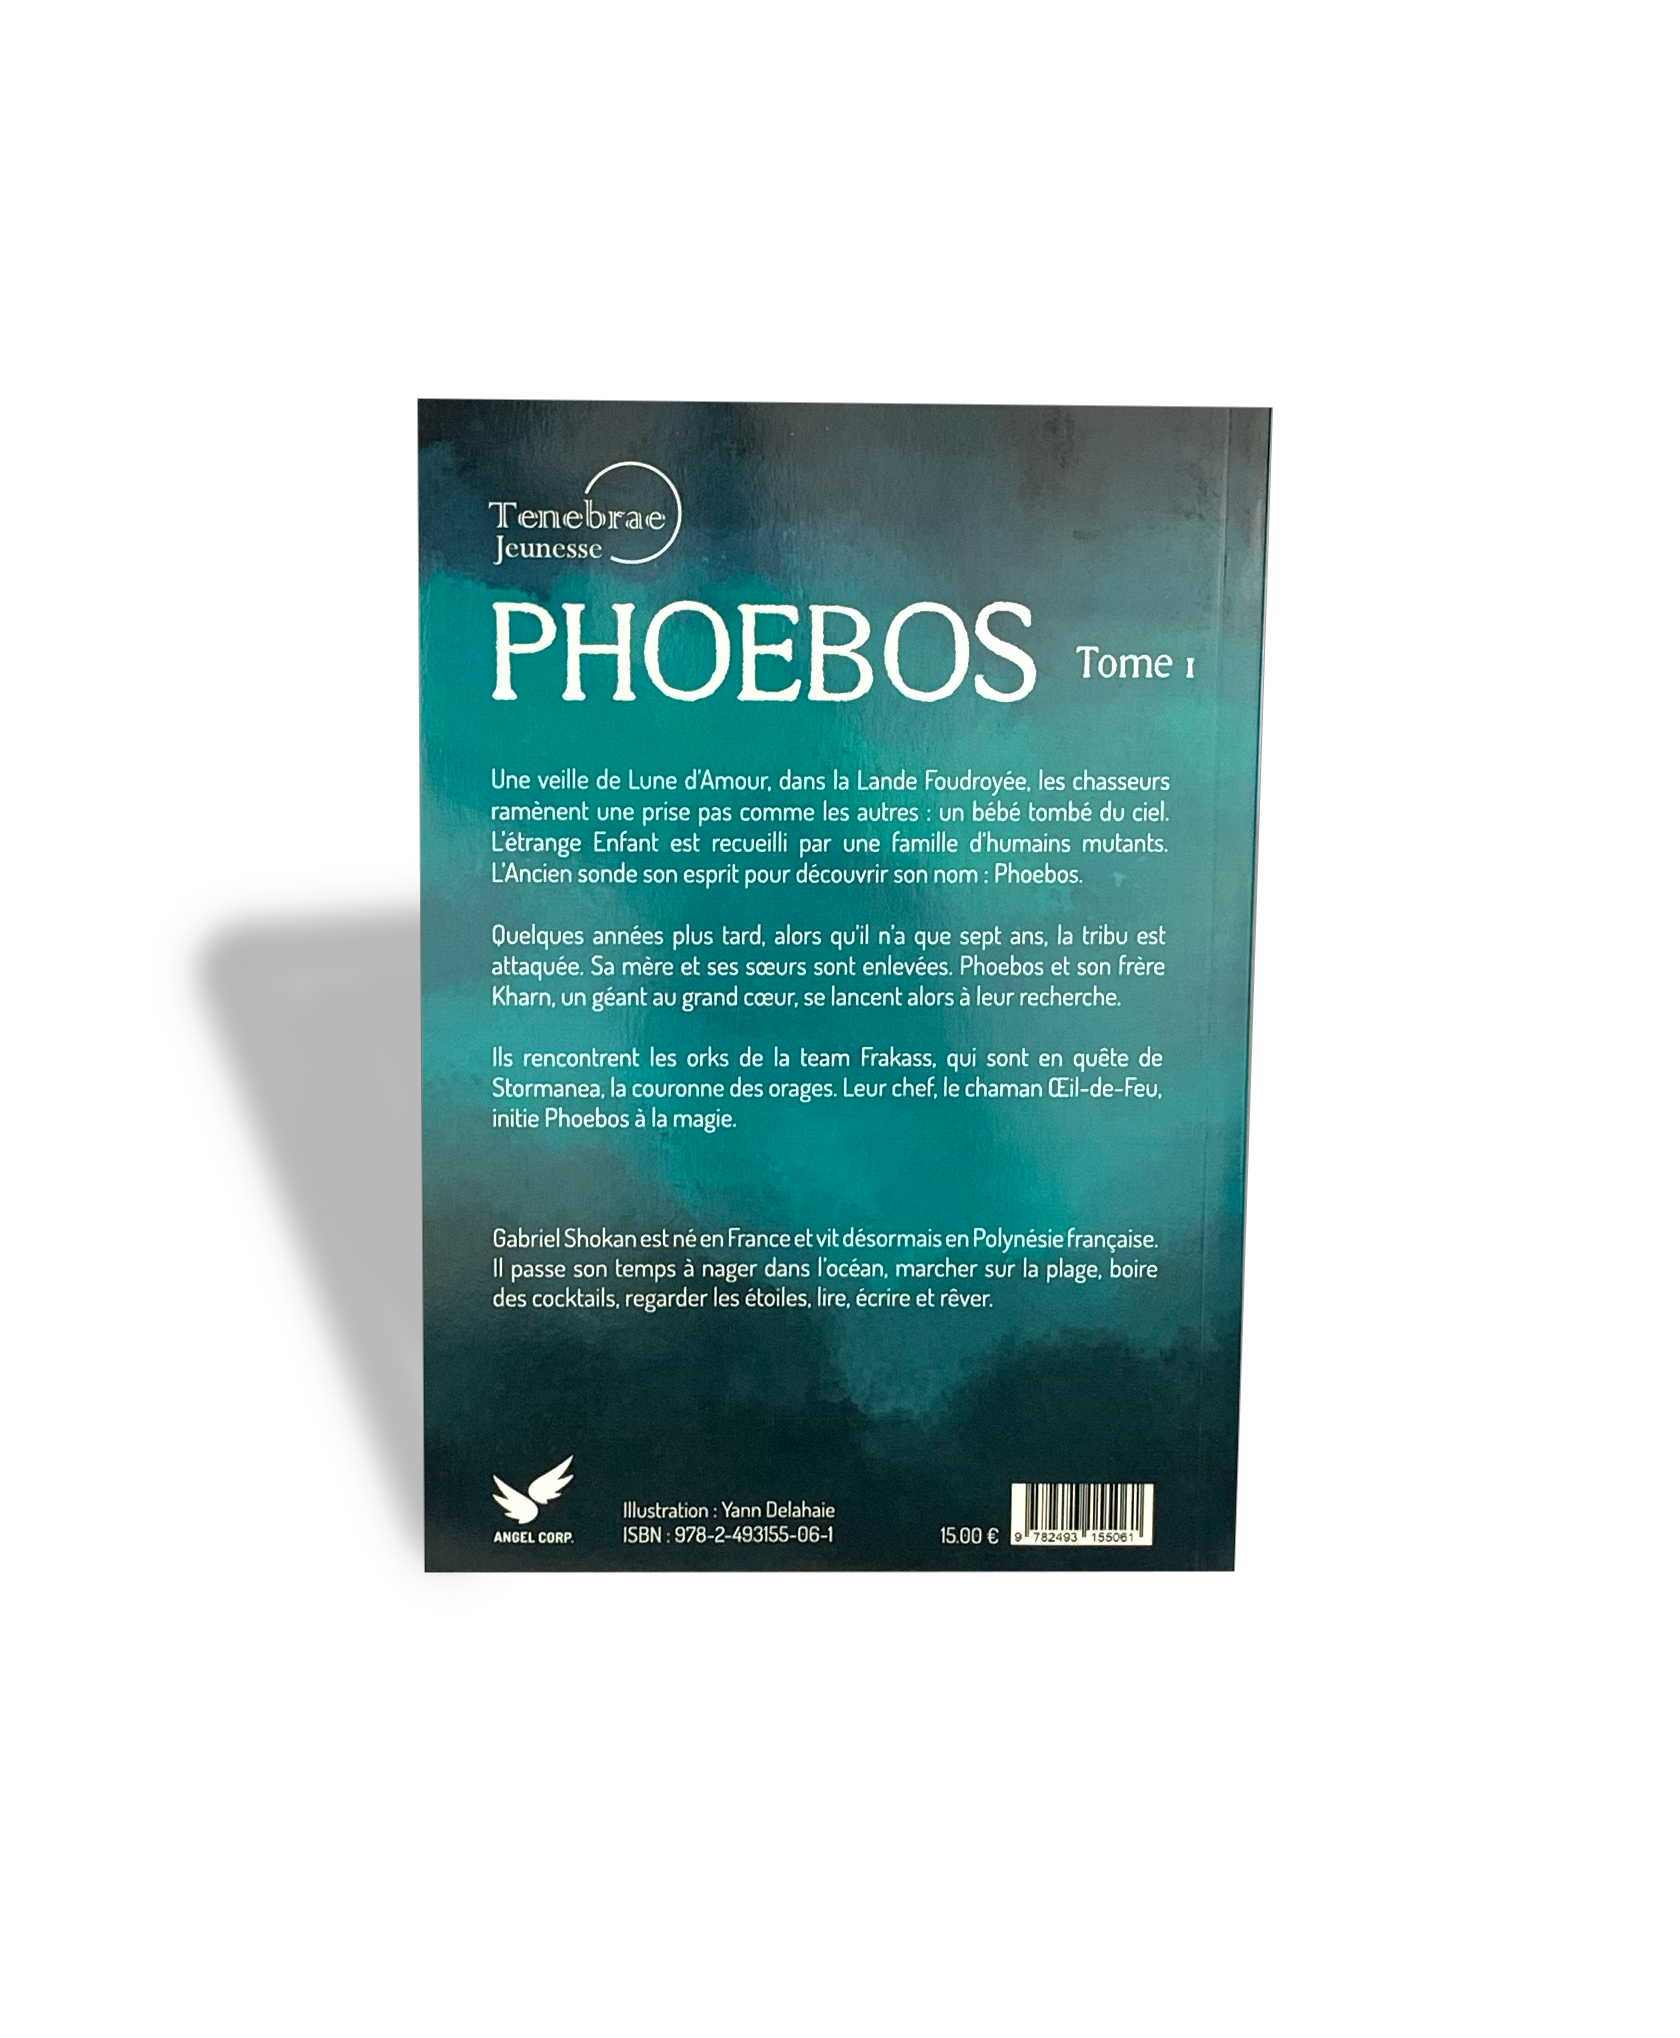 Phoebos - Jeunesse Tome 1